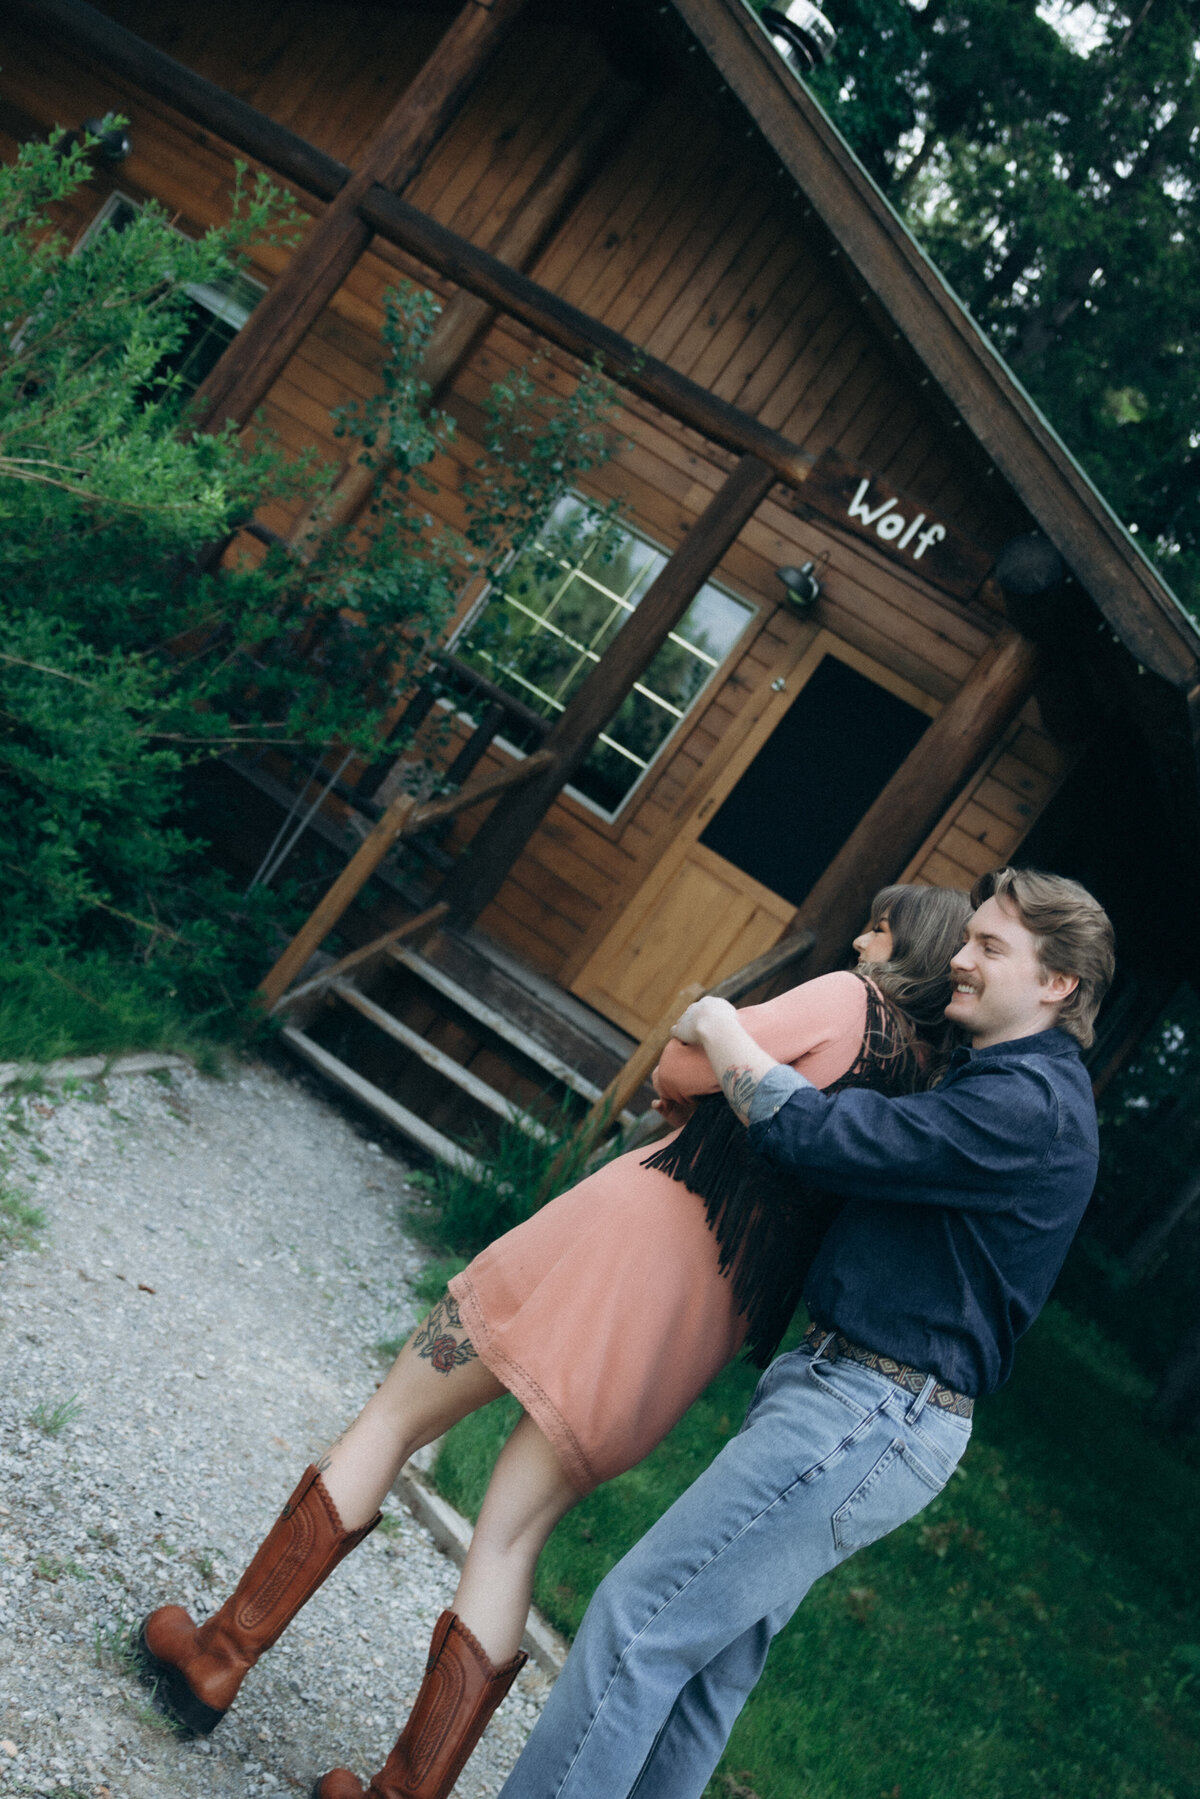 vpc-couples-vintage-cabin-shoot-11